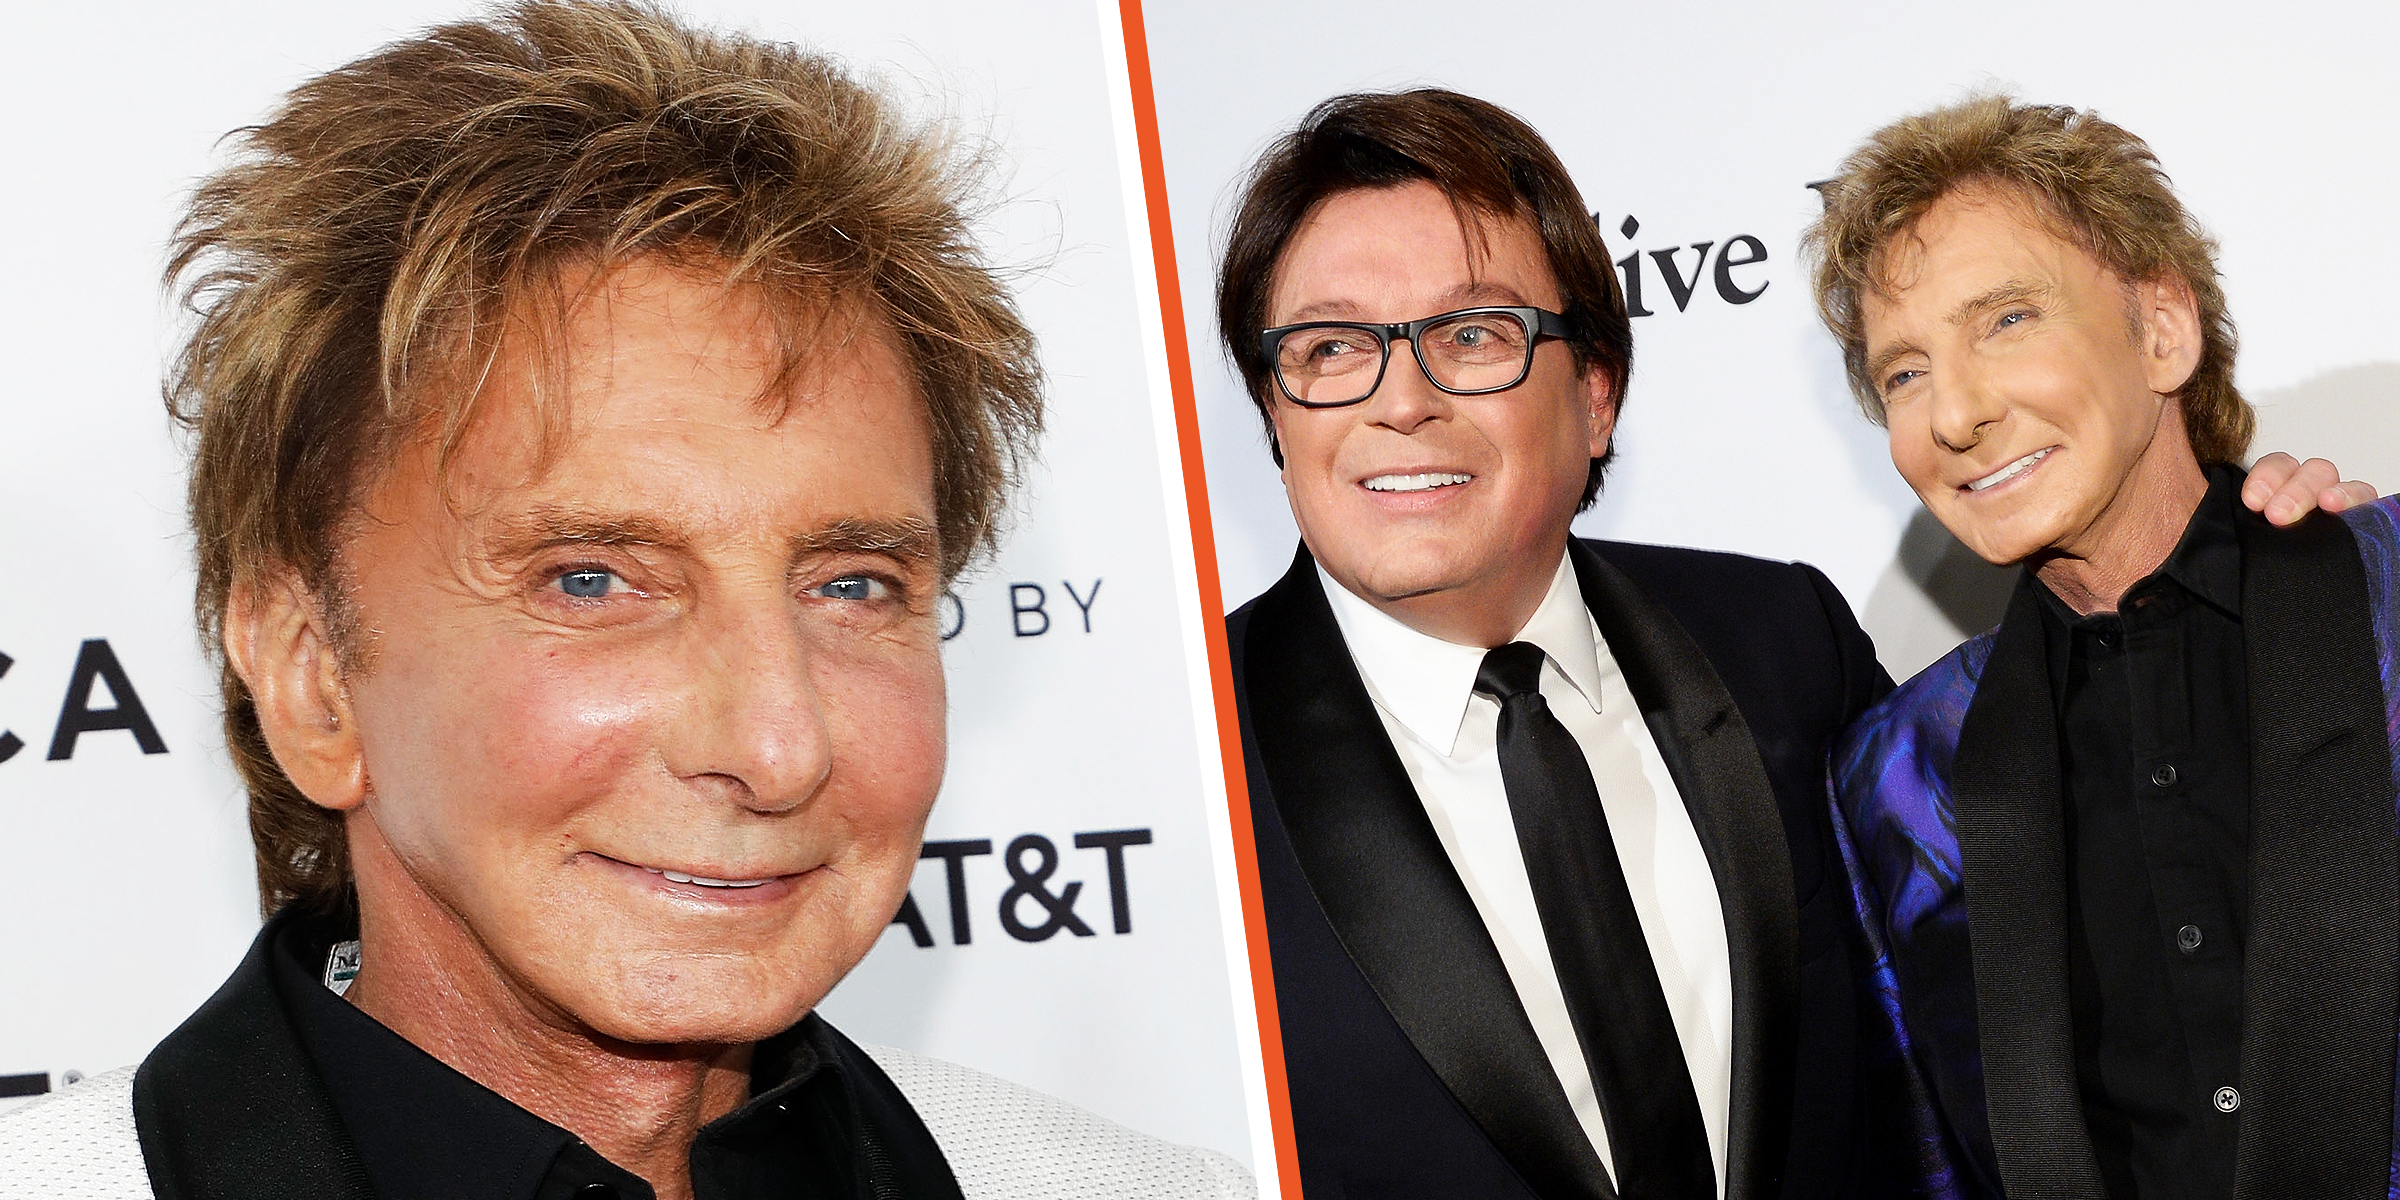 Barry Manilow | Garry Kief y Barry Manilow | Fuente: Getty Images